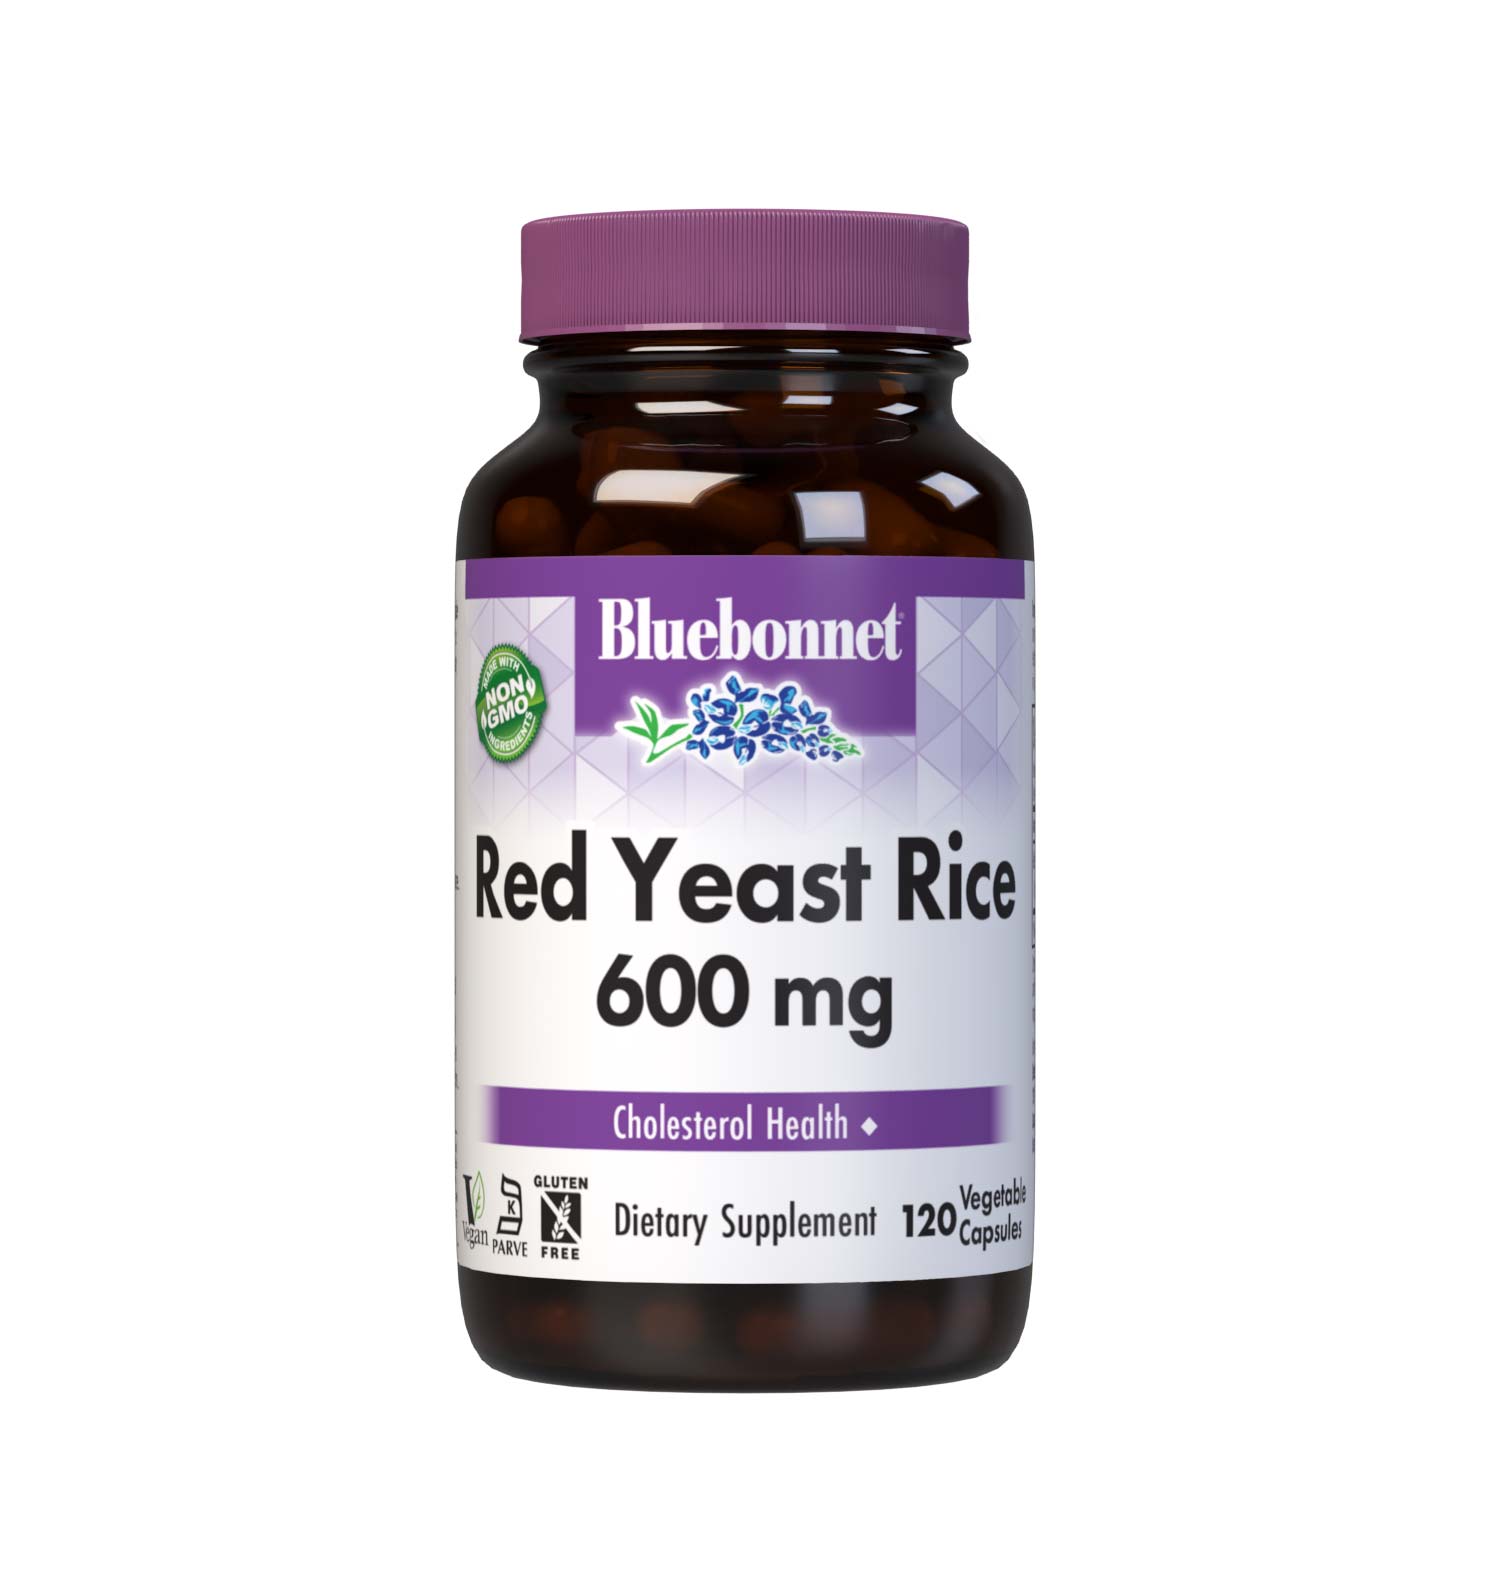 Bluebonnet’s Red Yeast Rice 600 mg 120 Vegetable Capsules are formulated with red yeast rice, which is the product of rice fermentation with various strains of the yeast, Monascus purpureus. Red yeast rice may help to maintain cholesterol levels that are already within the normal range. #size_120 count